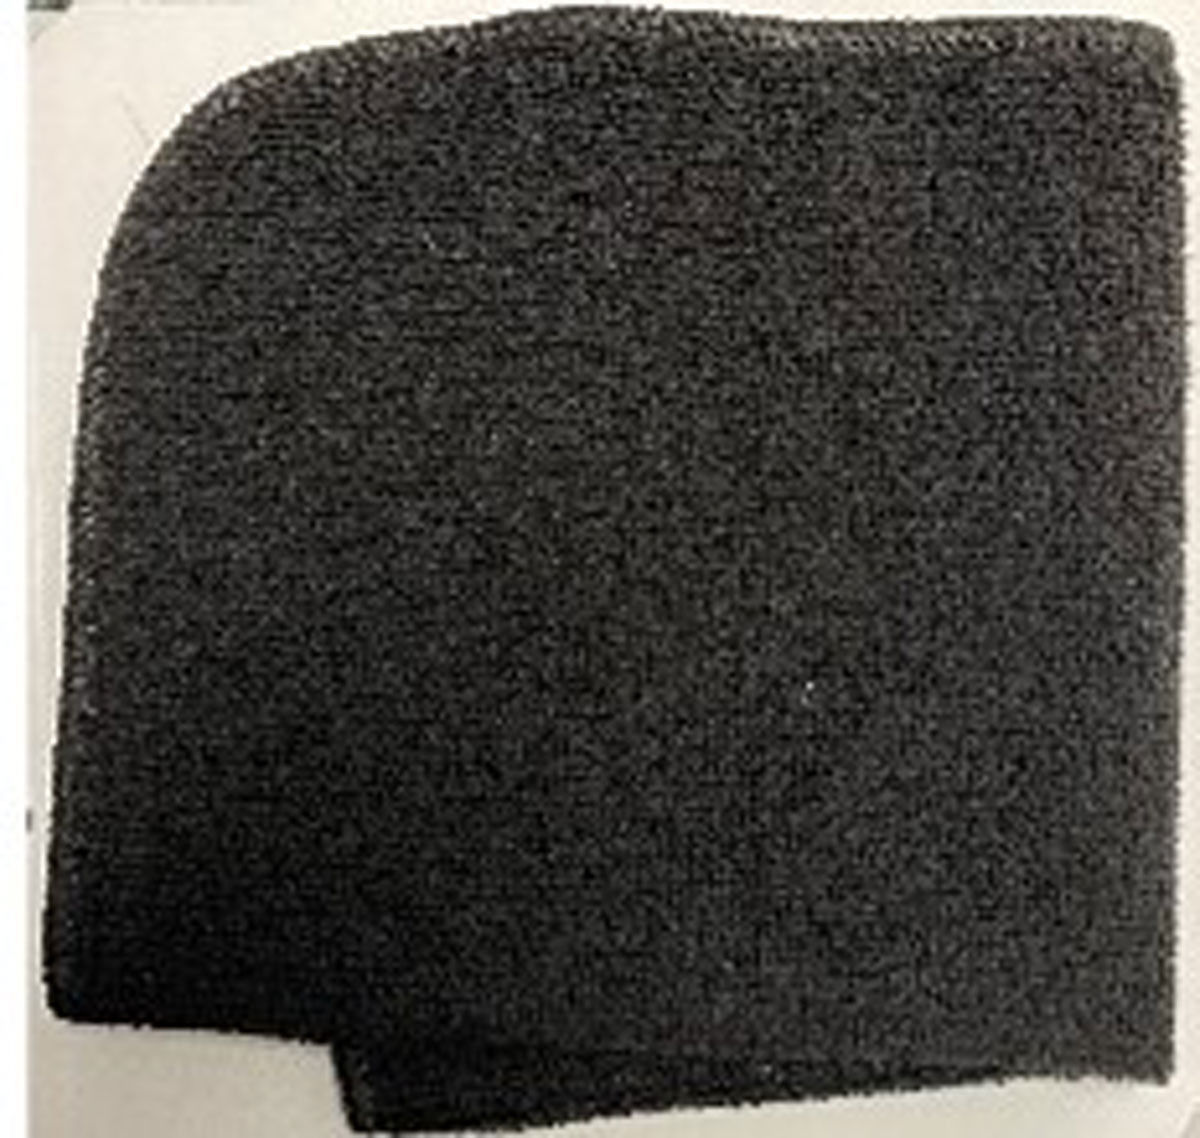 Is the black microfiber towel's edges stitched?